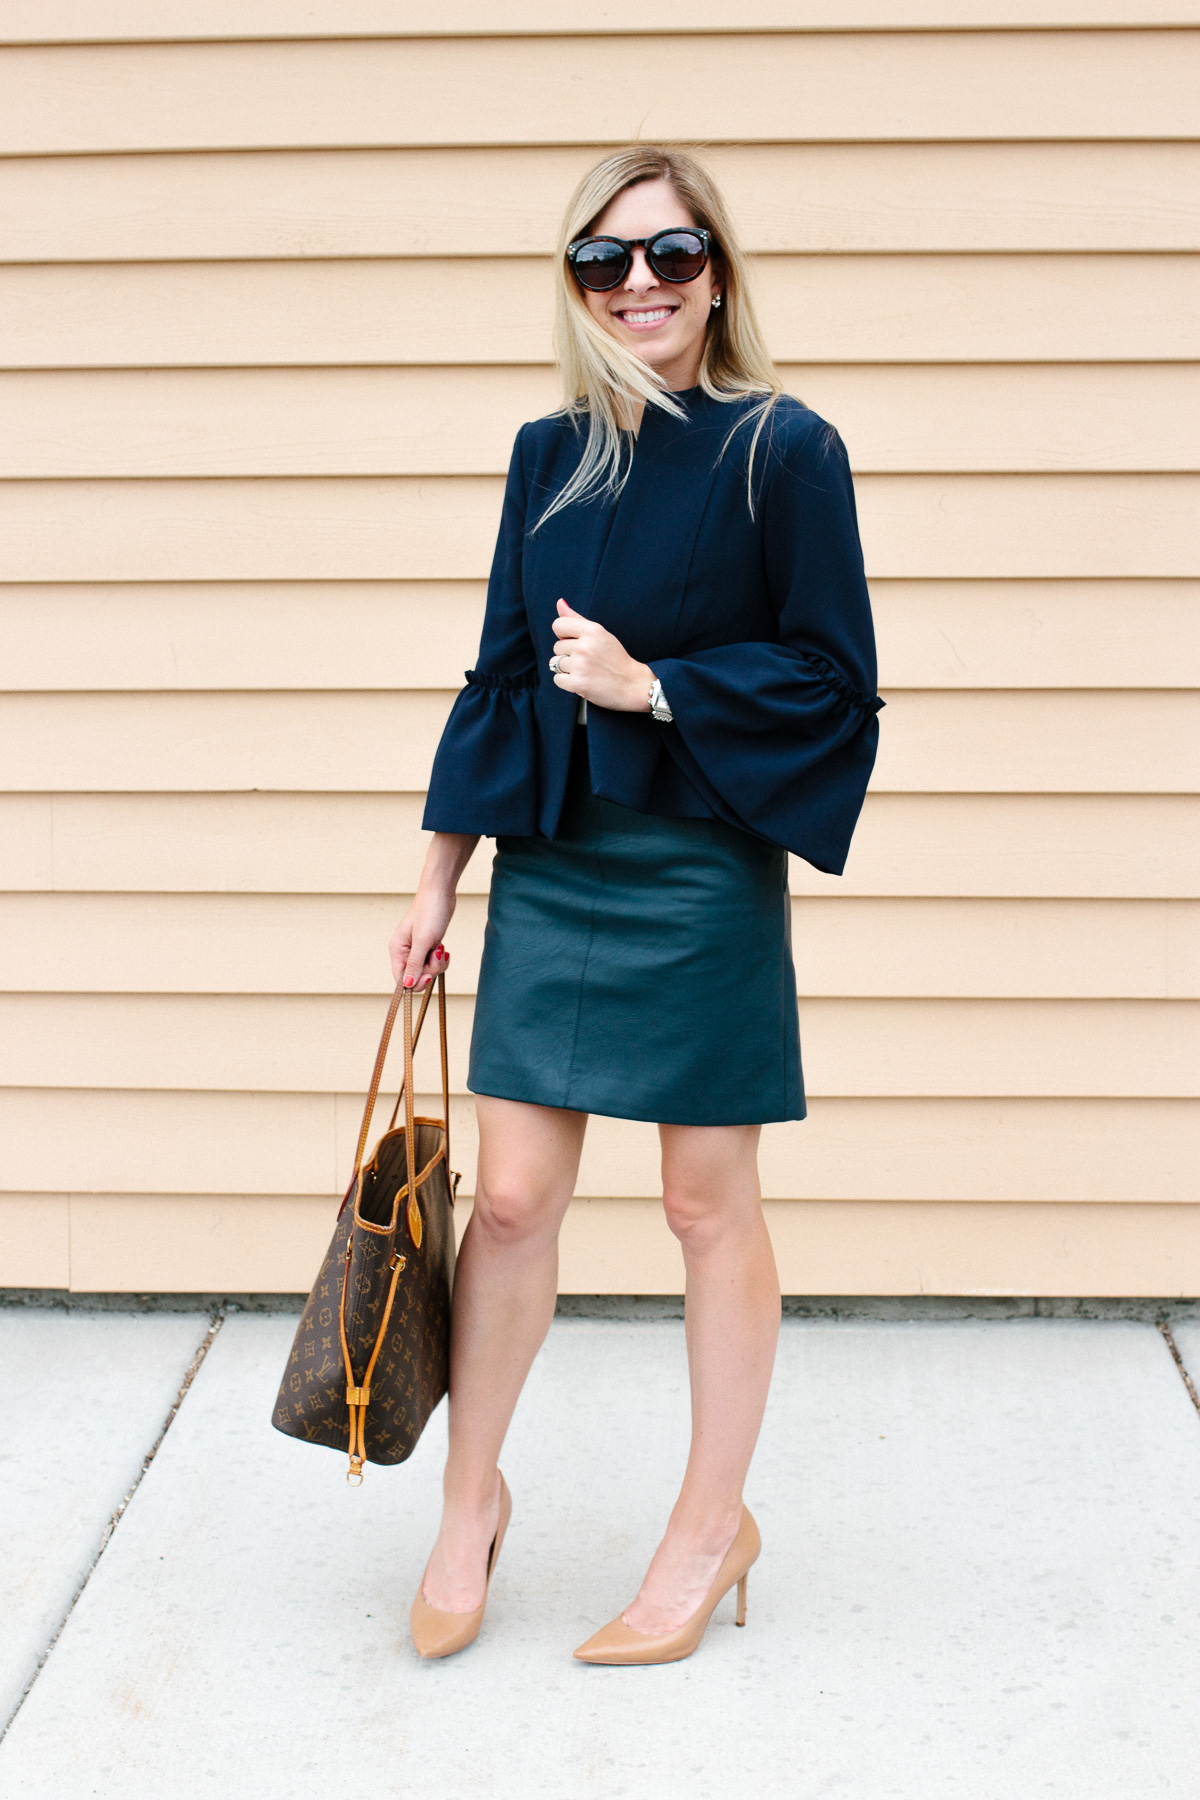 How to Style a Faux Leather Skirt for Work